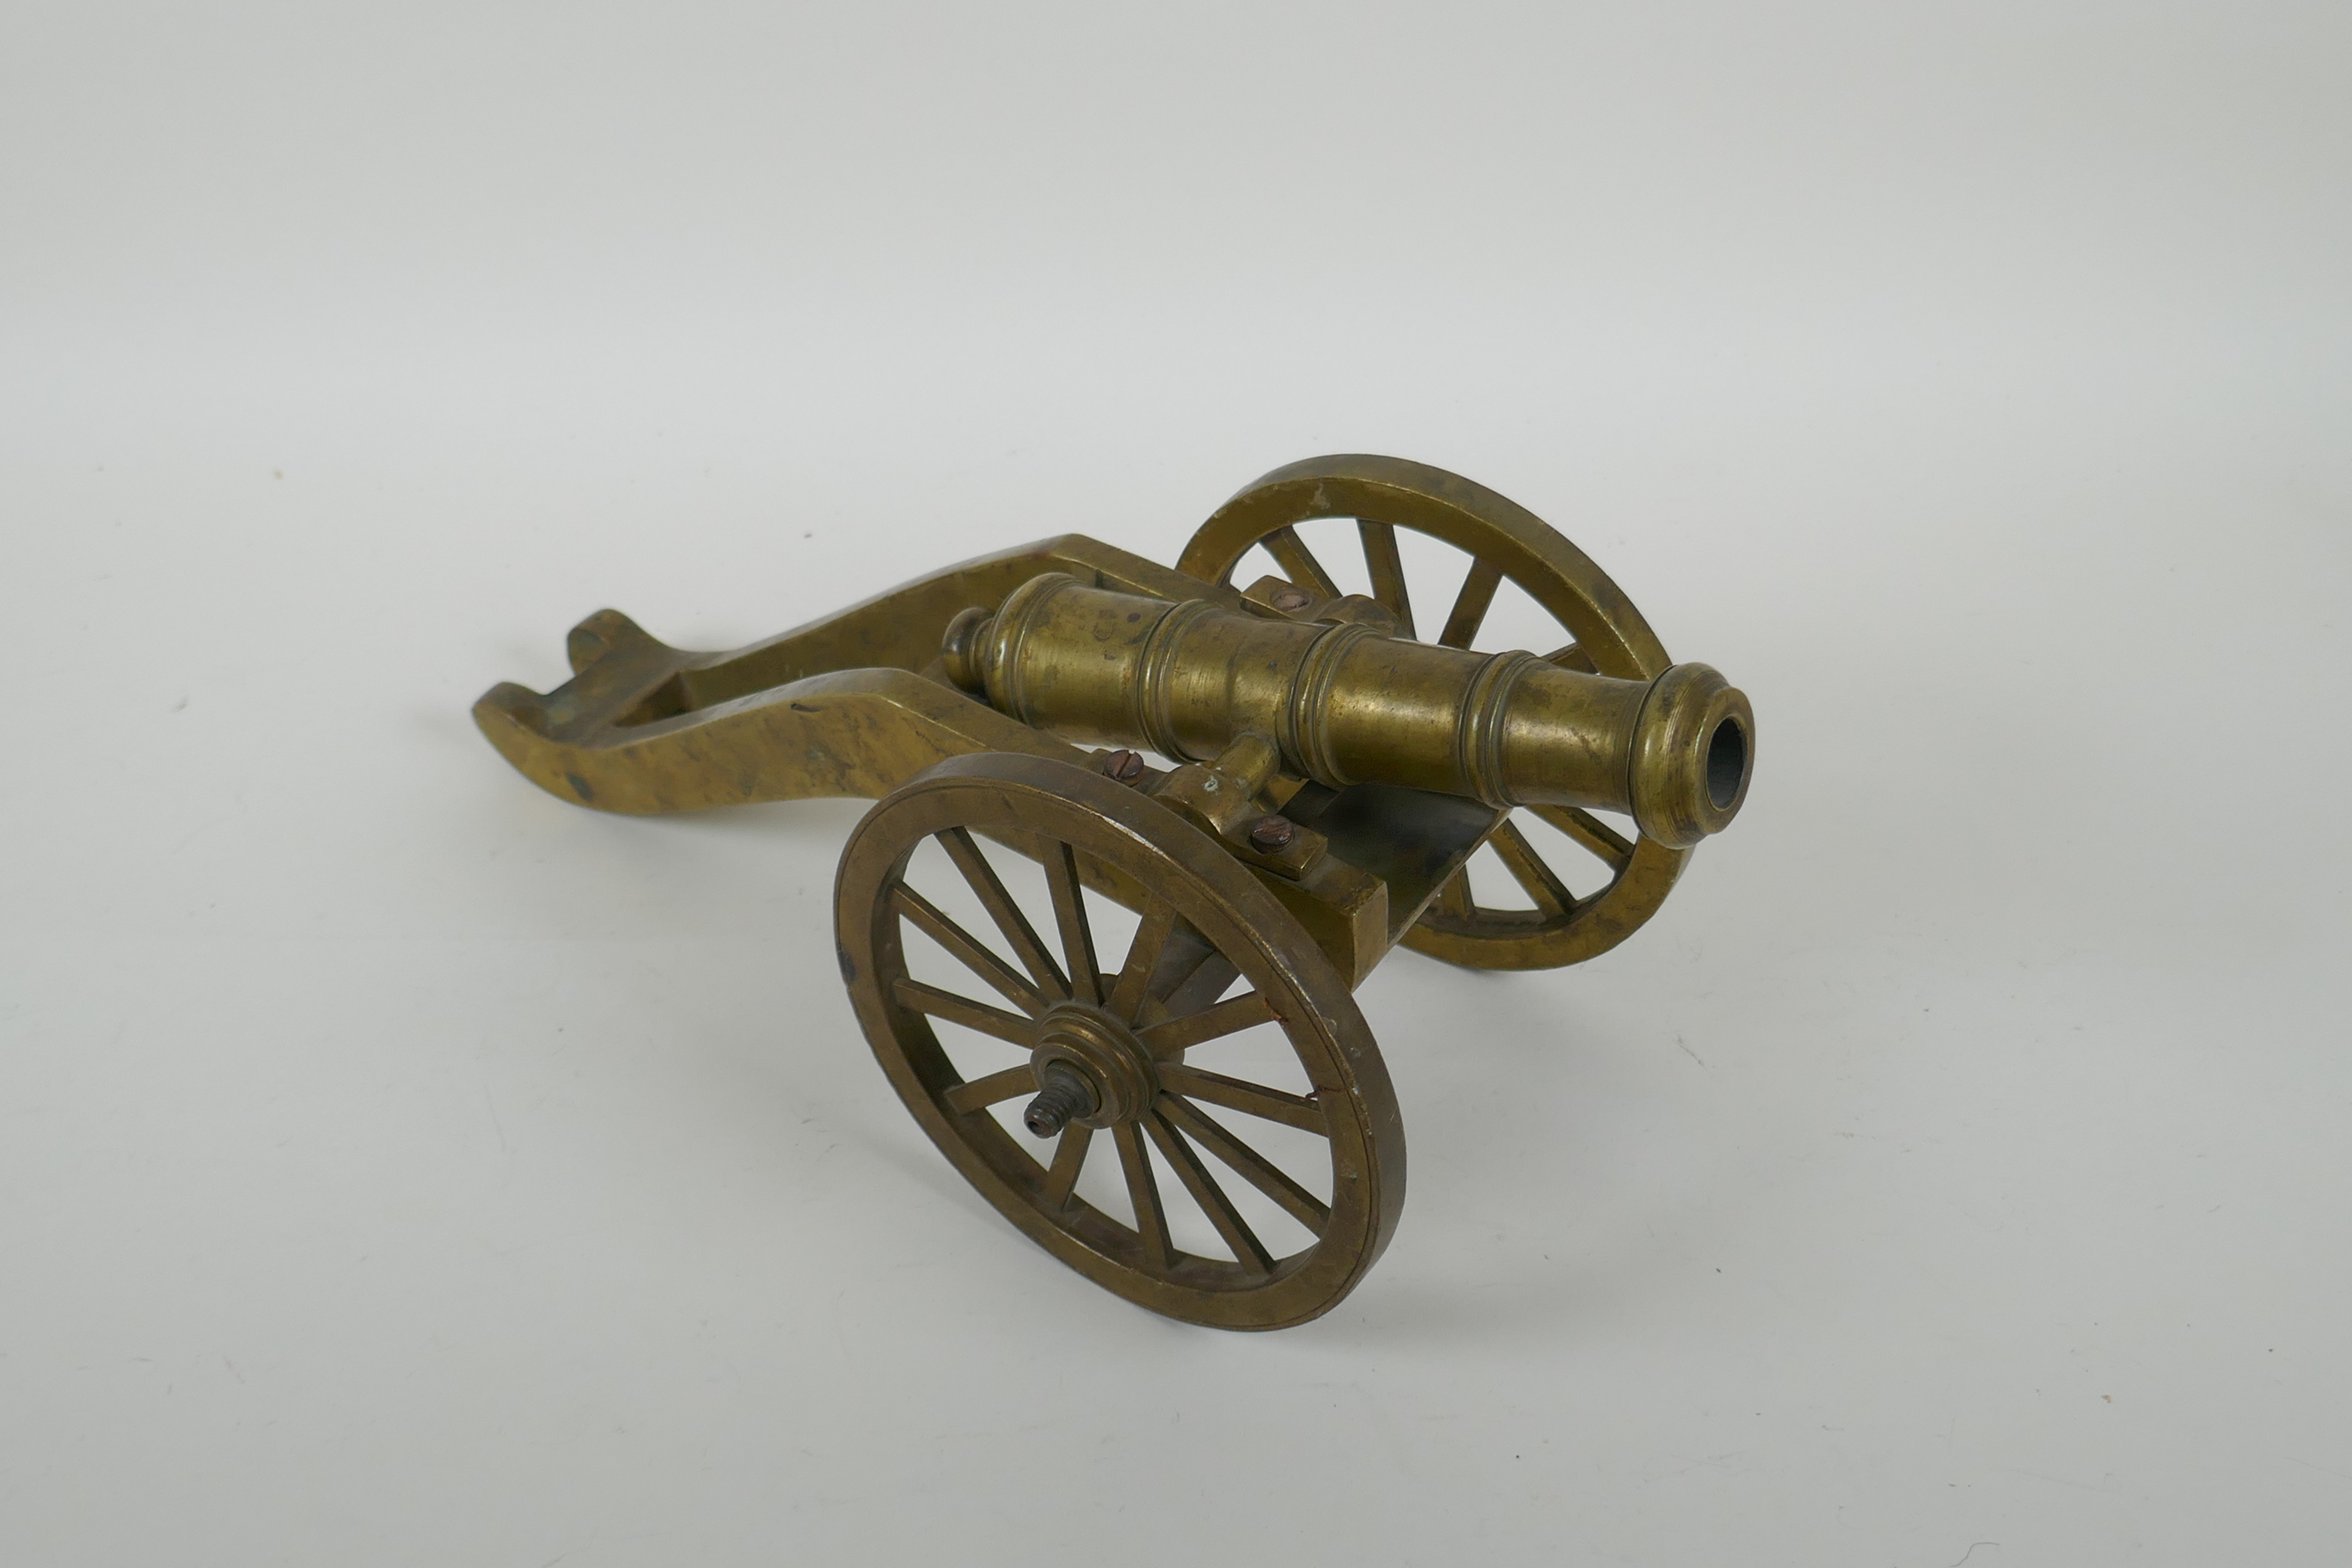 An antique bronze table canon, 33cm long, AF missing wheel nuts - Image 2 of 4